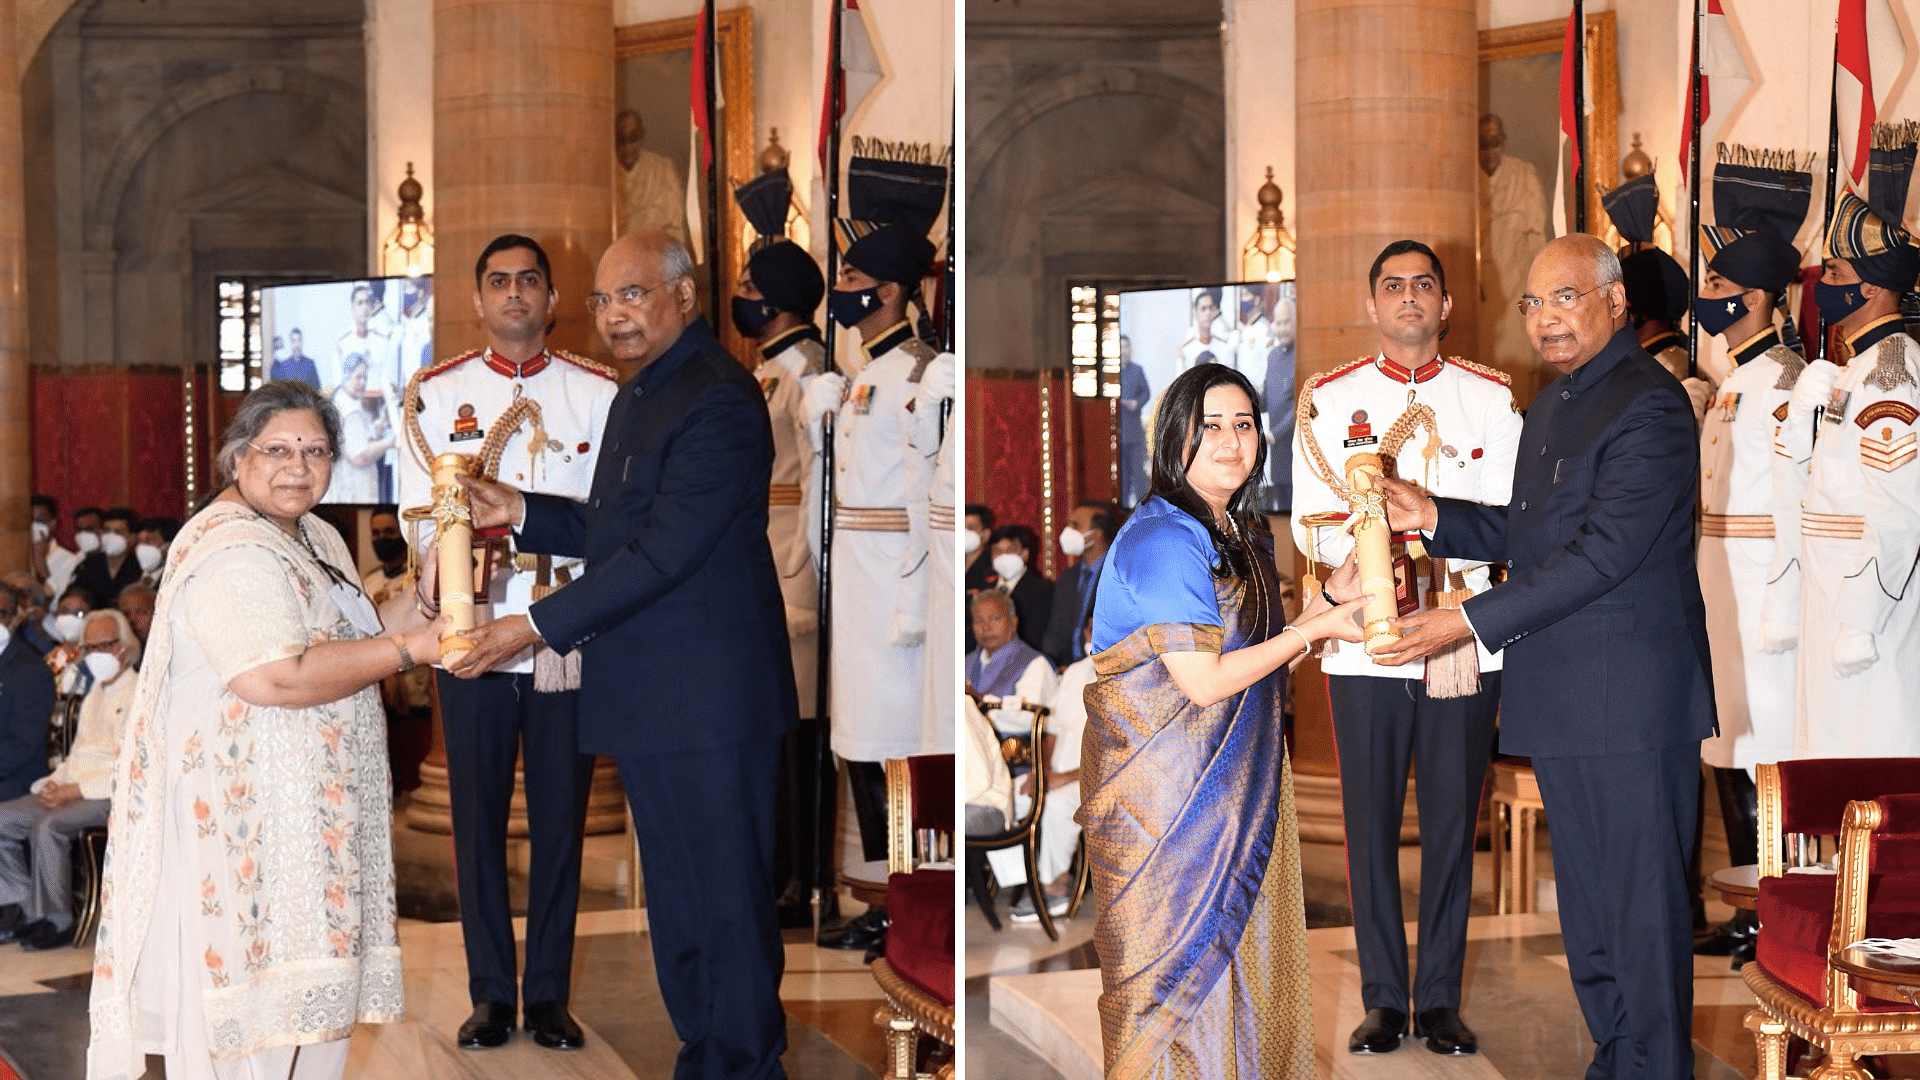 <div class="paragraphs"><p>Sushma Swaraj's daughter Bansuri accepted the award from Kovind, while Arun Jaitley's award was given to his wife Sangeeta.</p></div>